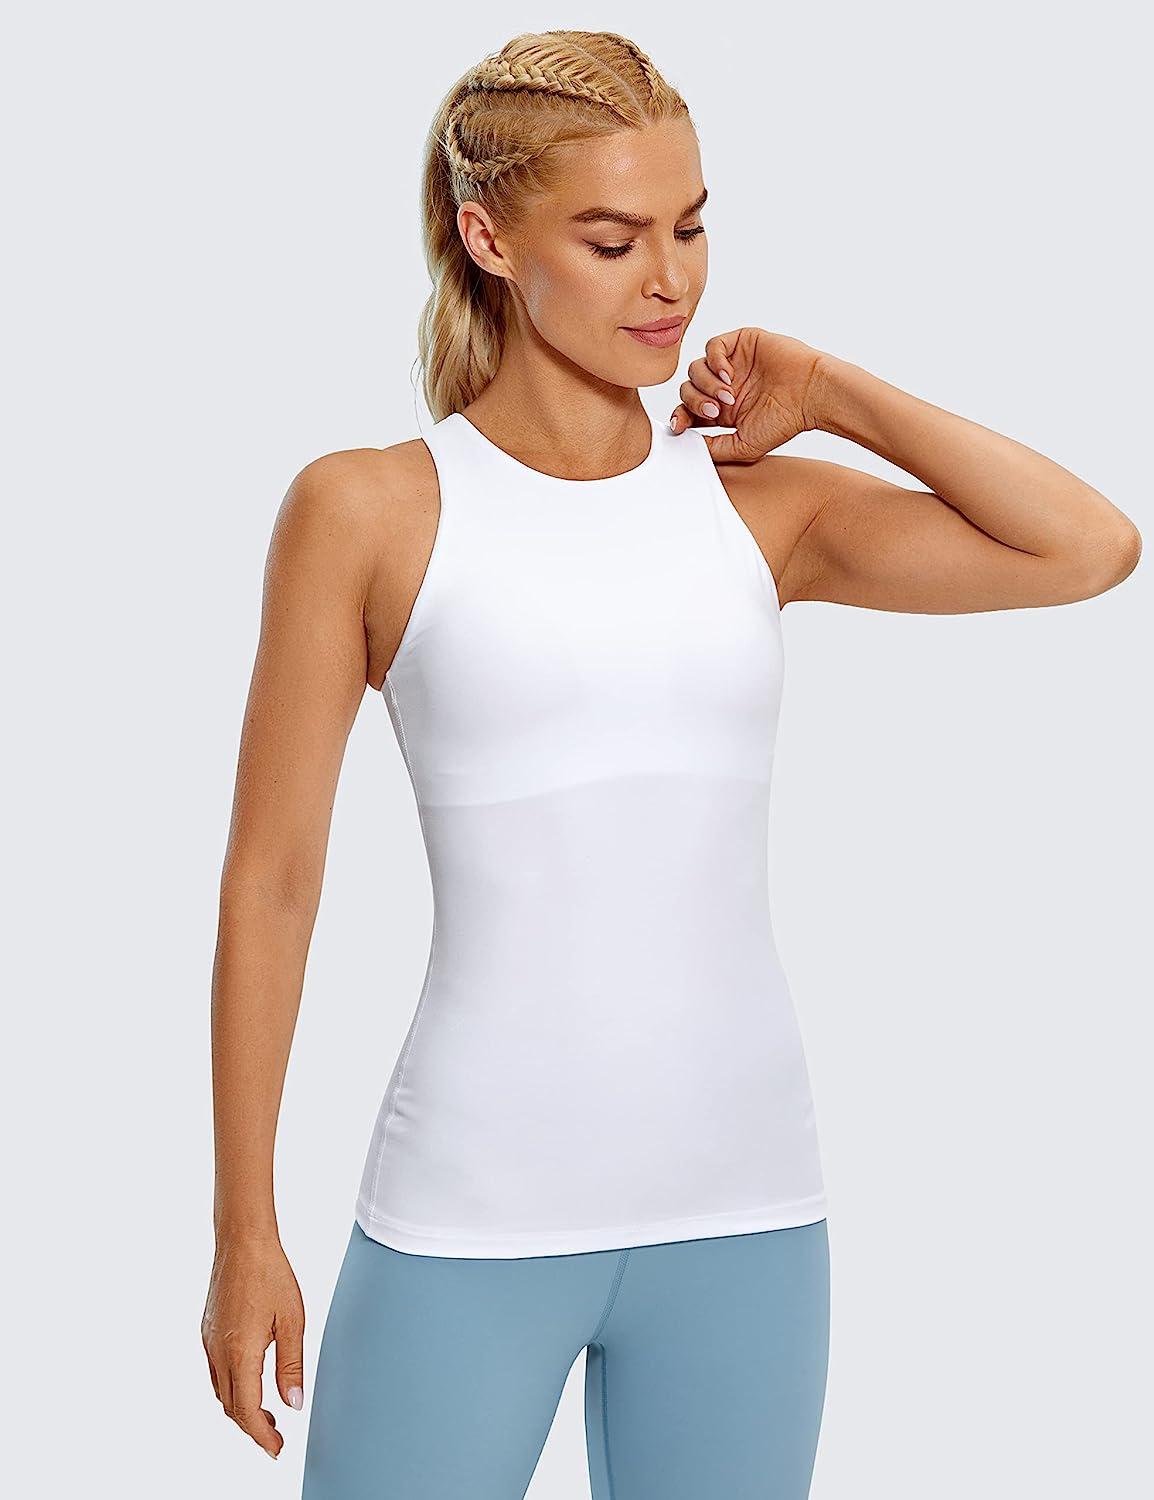 CRZ YOGA Womens High Neck Workout Tank Tops - with Built-in Shelf Bra  Racerback Athletic Sports Shirts Large White